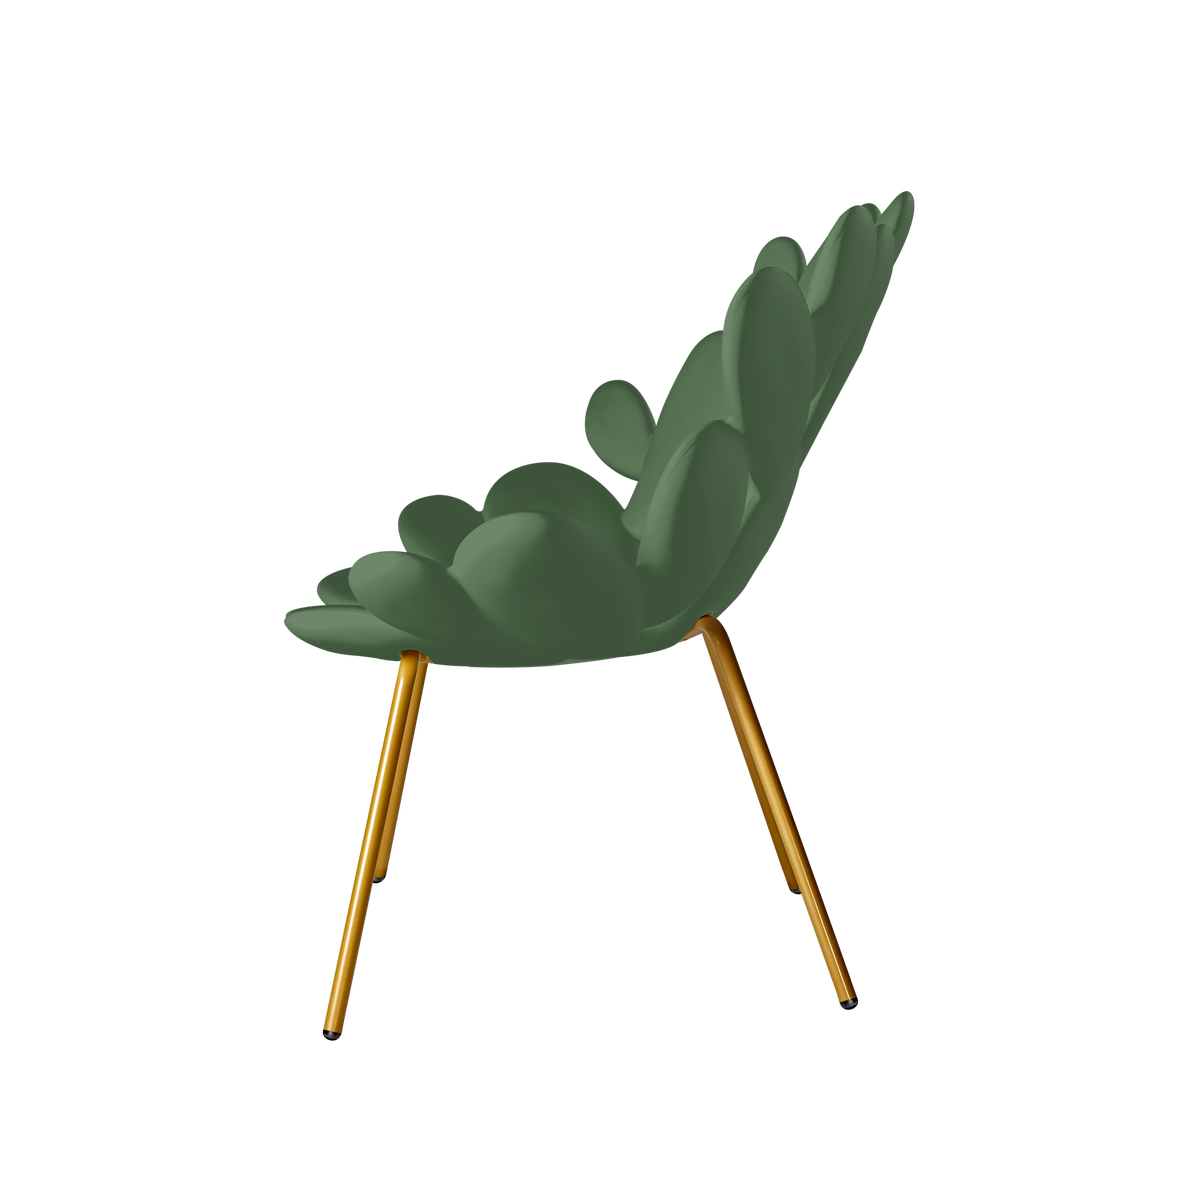 The Filicudi salon armchair, designed by Marcantonio, is able to recreate Mediterranean magic in your daily spaces. Inspired by the iconic leaf of prickly pear, he recalls a magical place of rest and wildlife.